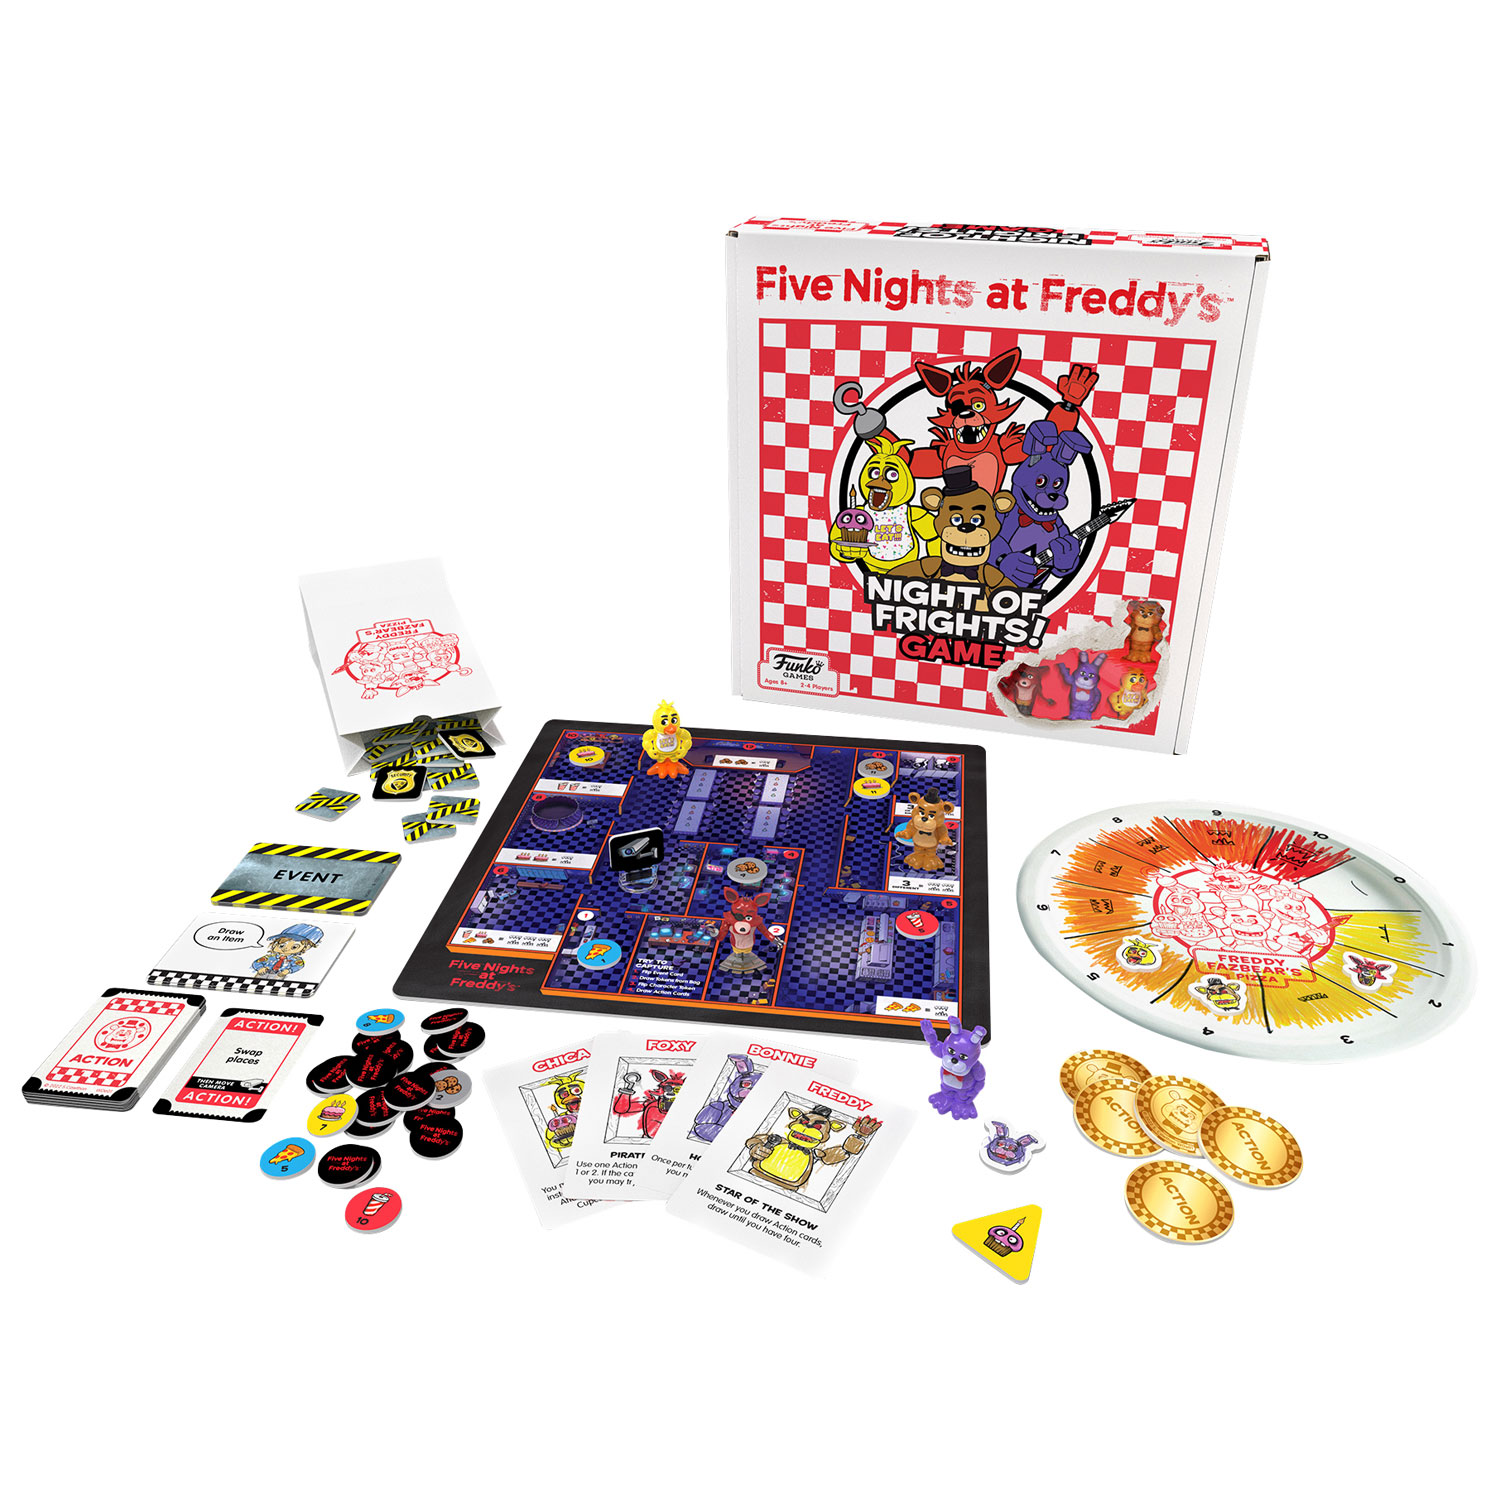 Funko Five Nights At Freddy's - Night of Frights Board Game